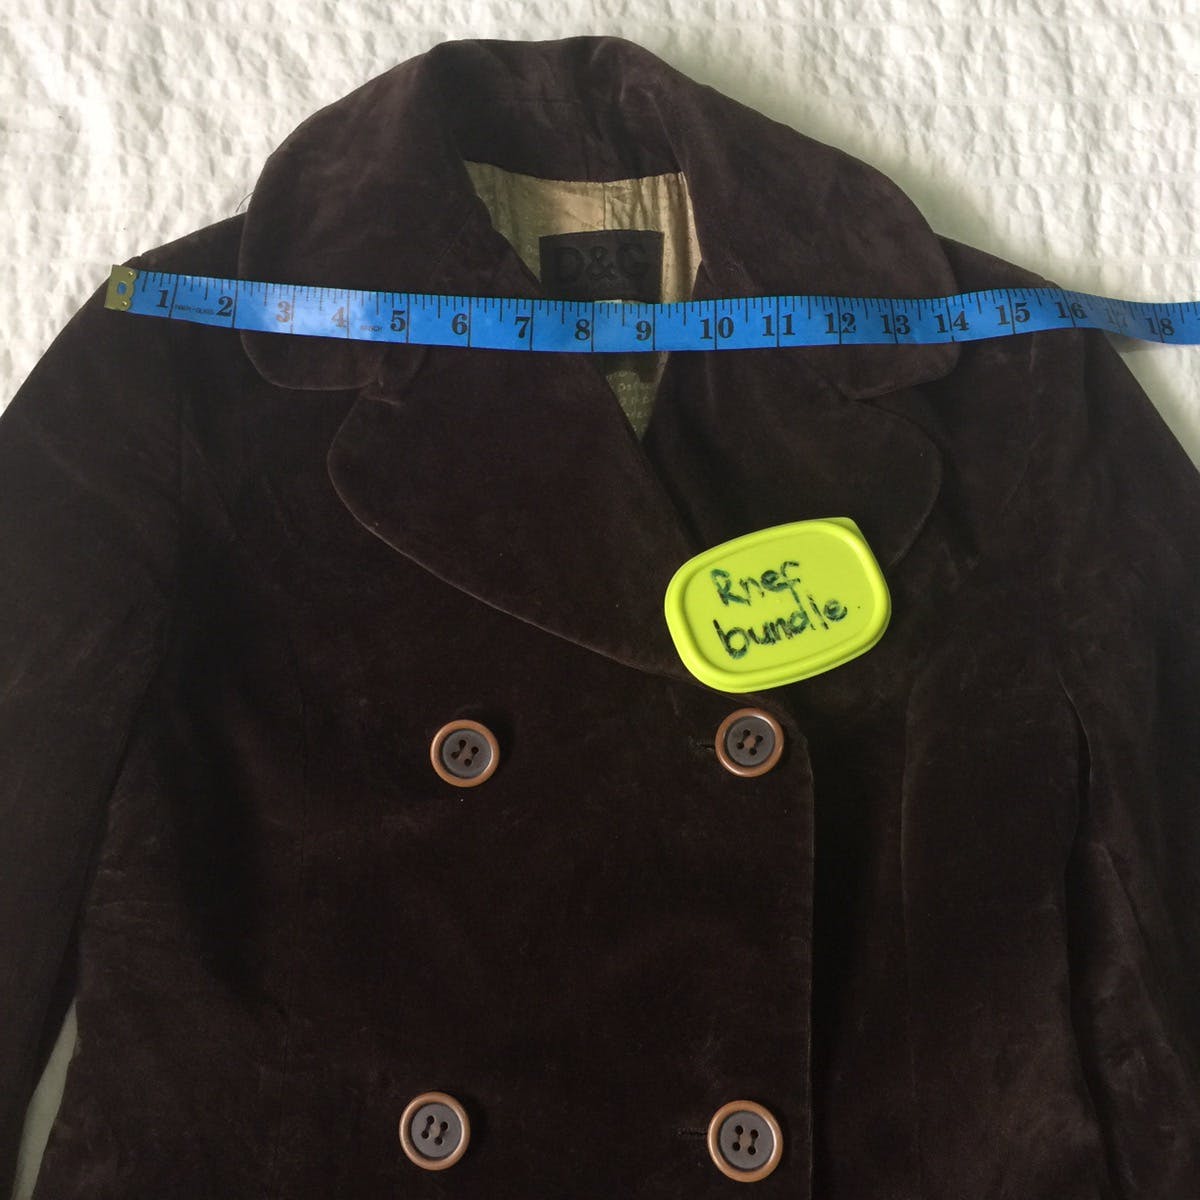 Authentic dolce & gabbana jacket made in Italy - 10